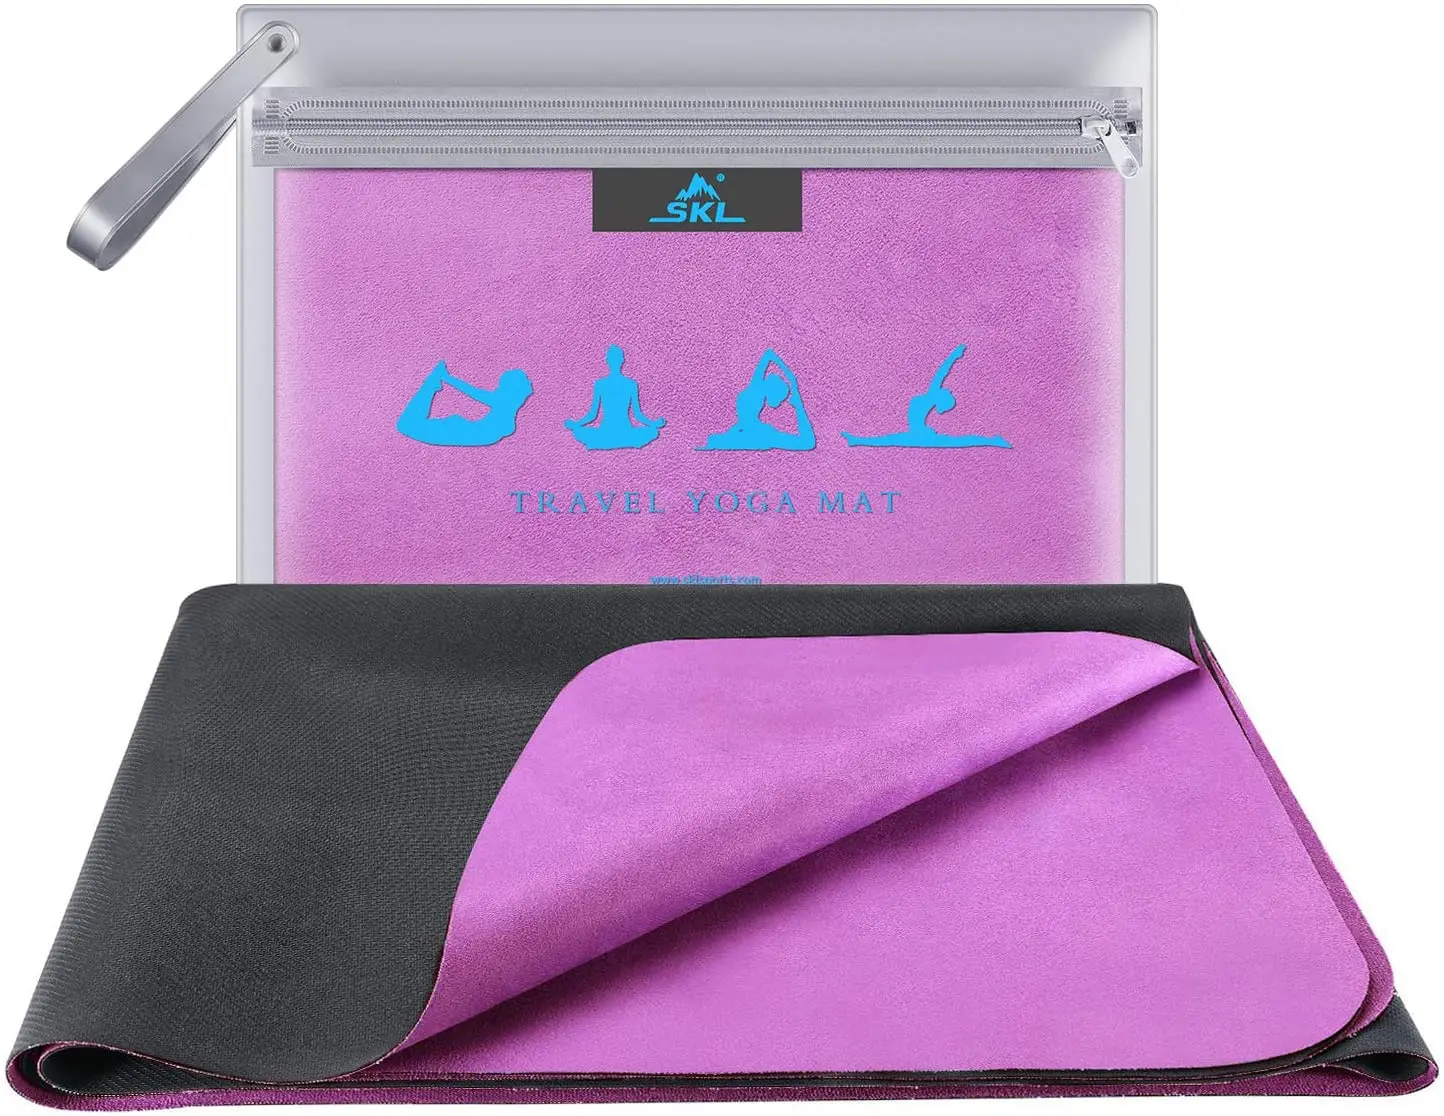 

Travel Yoga Mat - Foldable 1/16 Inch Thin Hot Yoga Mat Non Slip Sweat Absorbent Fitness & Exercise Mat for Yoga, Customized